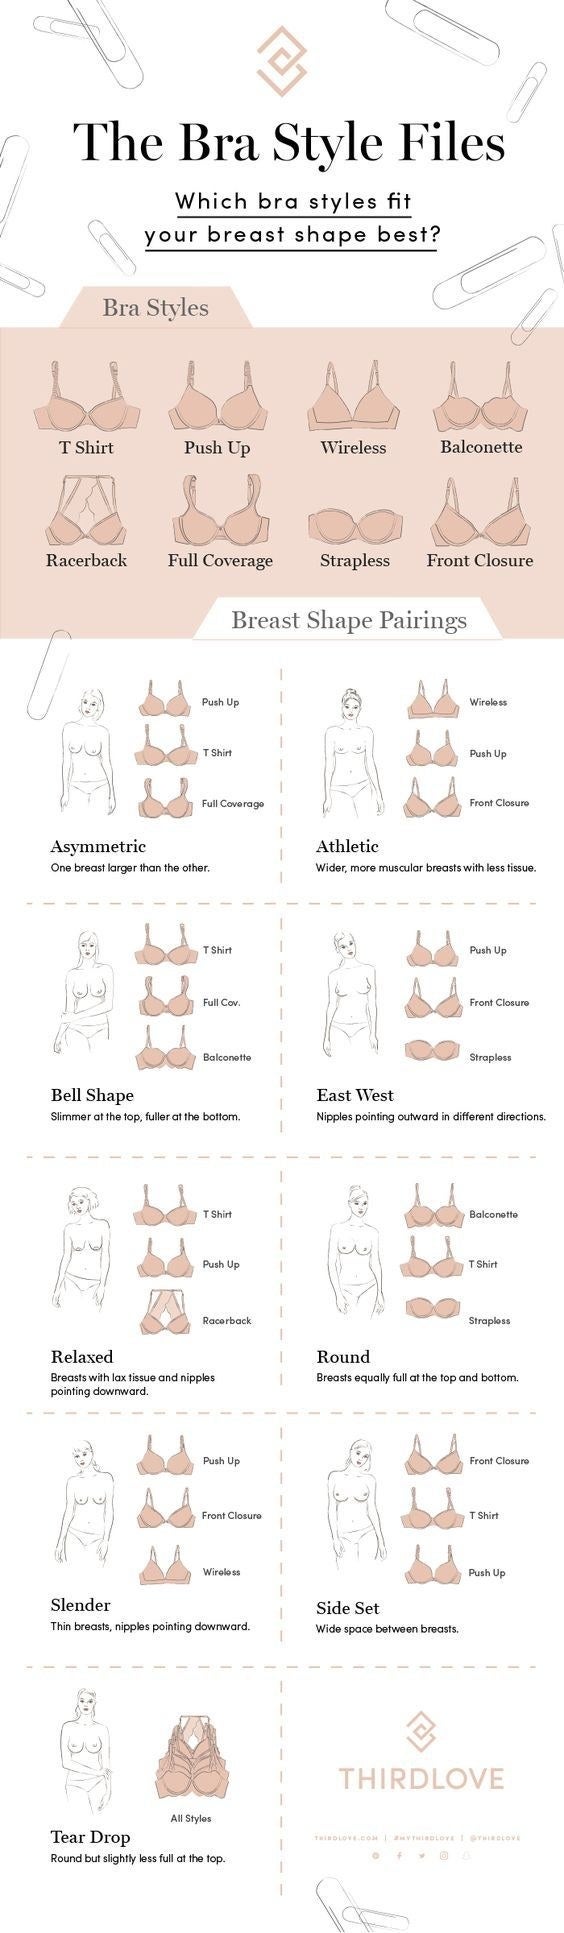 Which Bra Type is Best For Me?